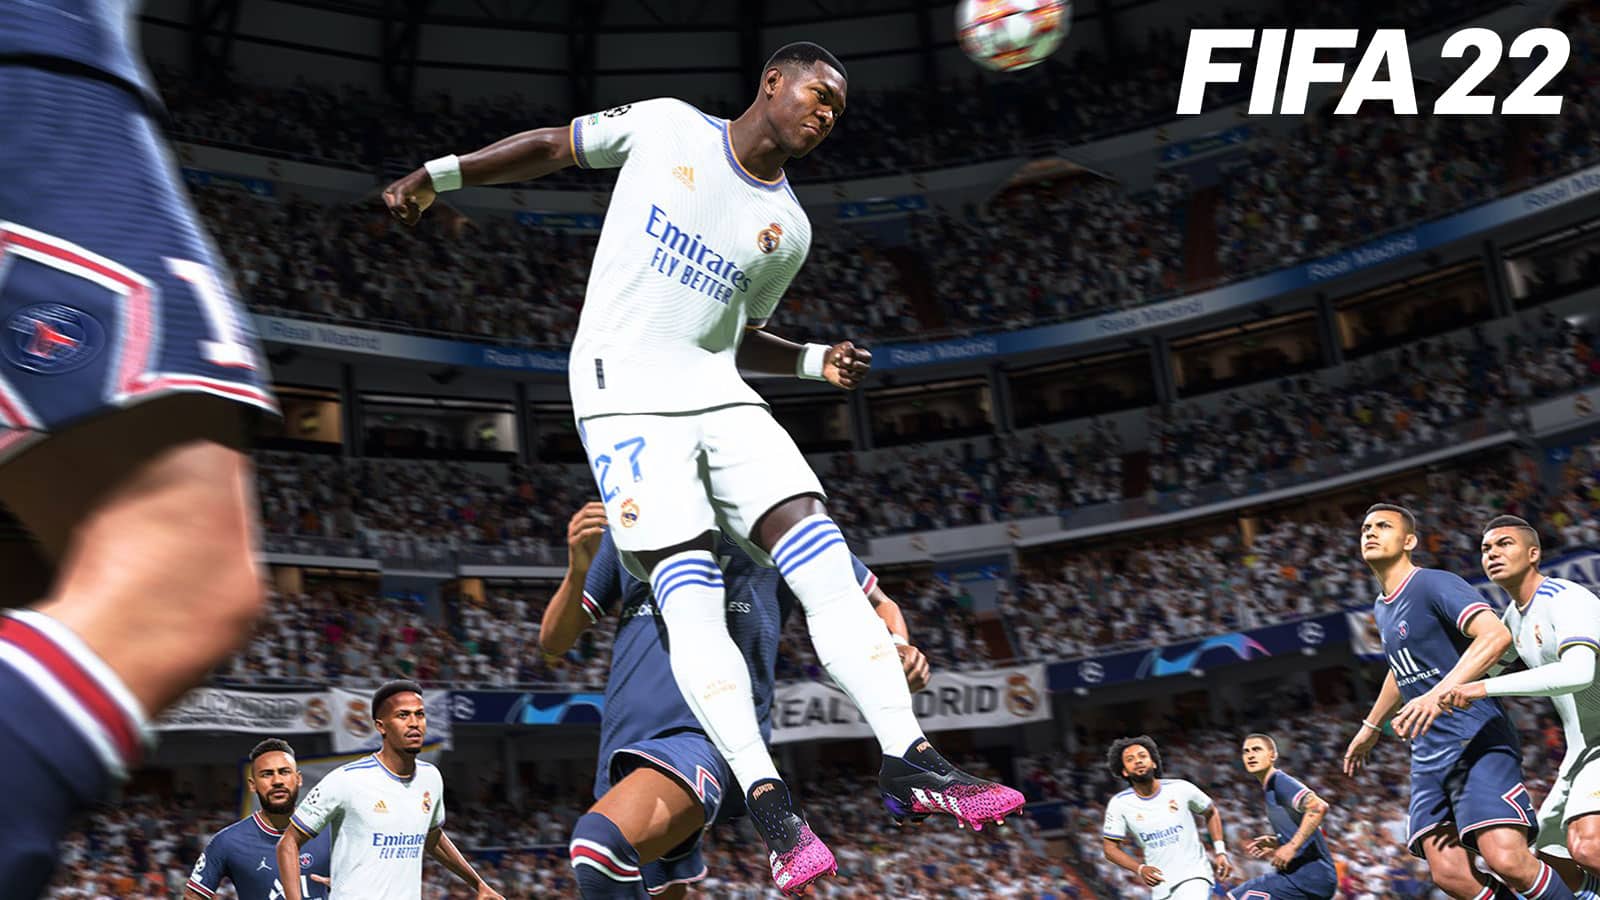 FIFA 23: Best Controller Settings and Camera